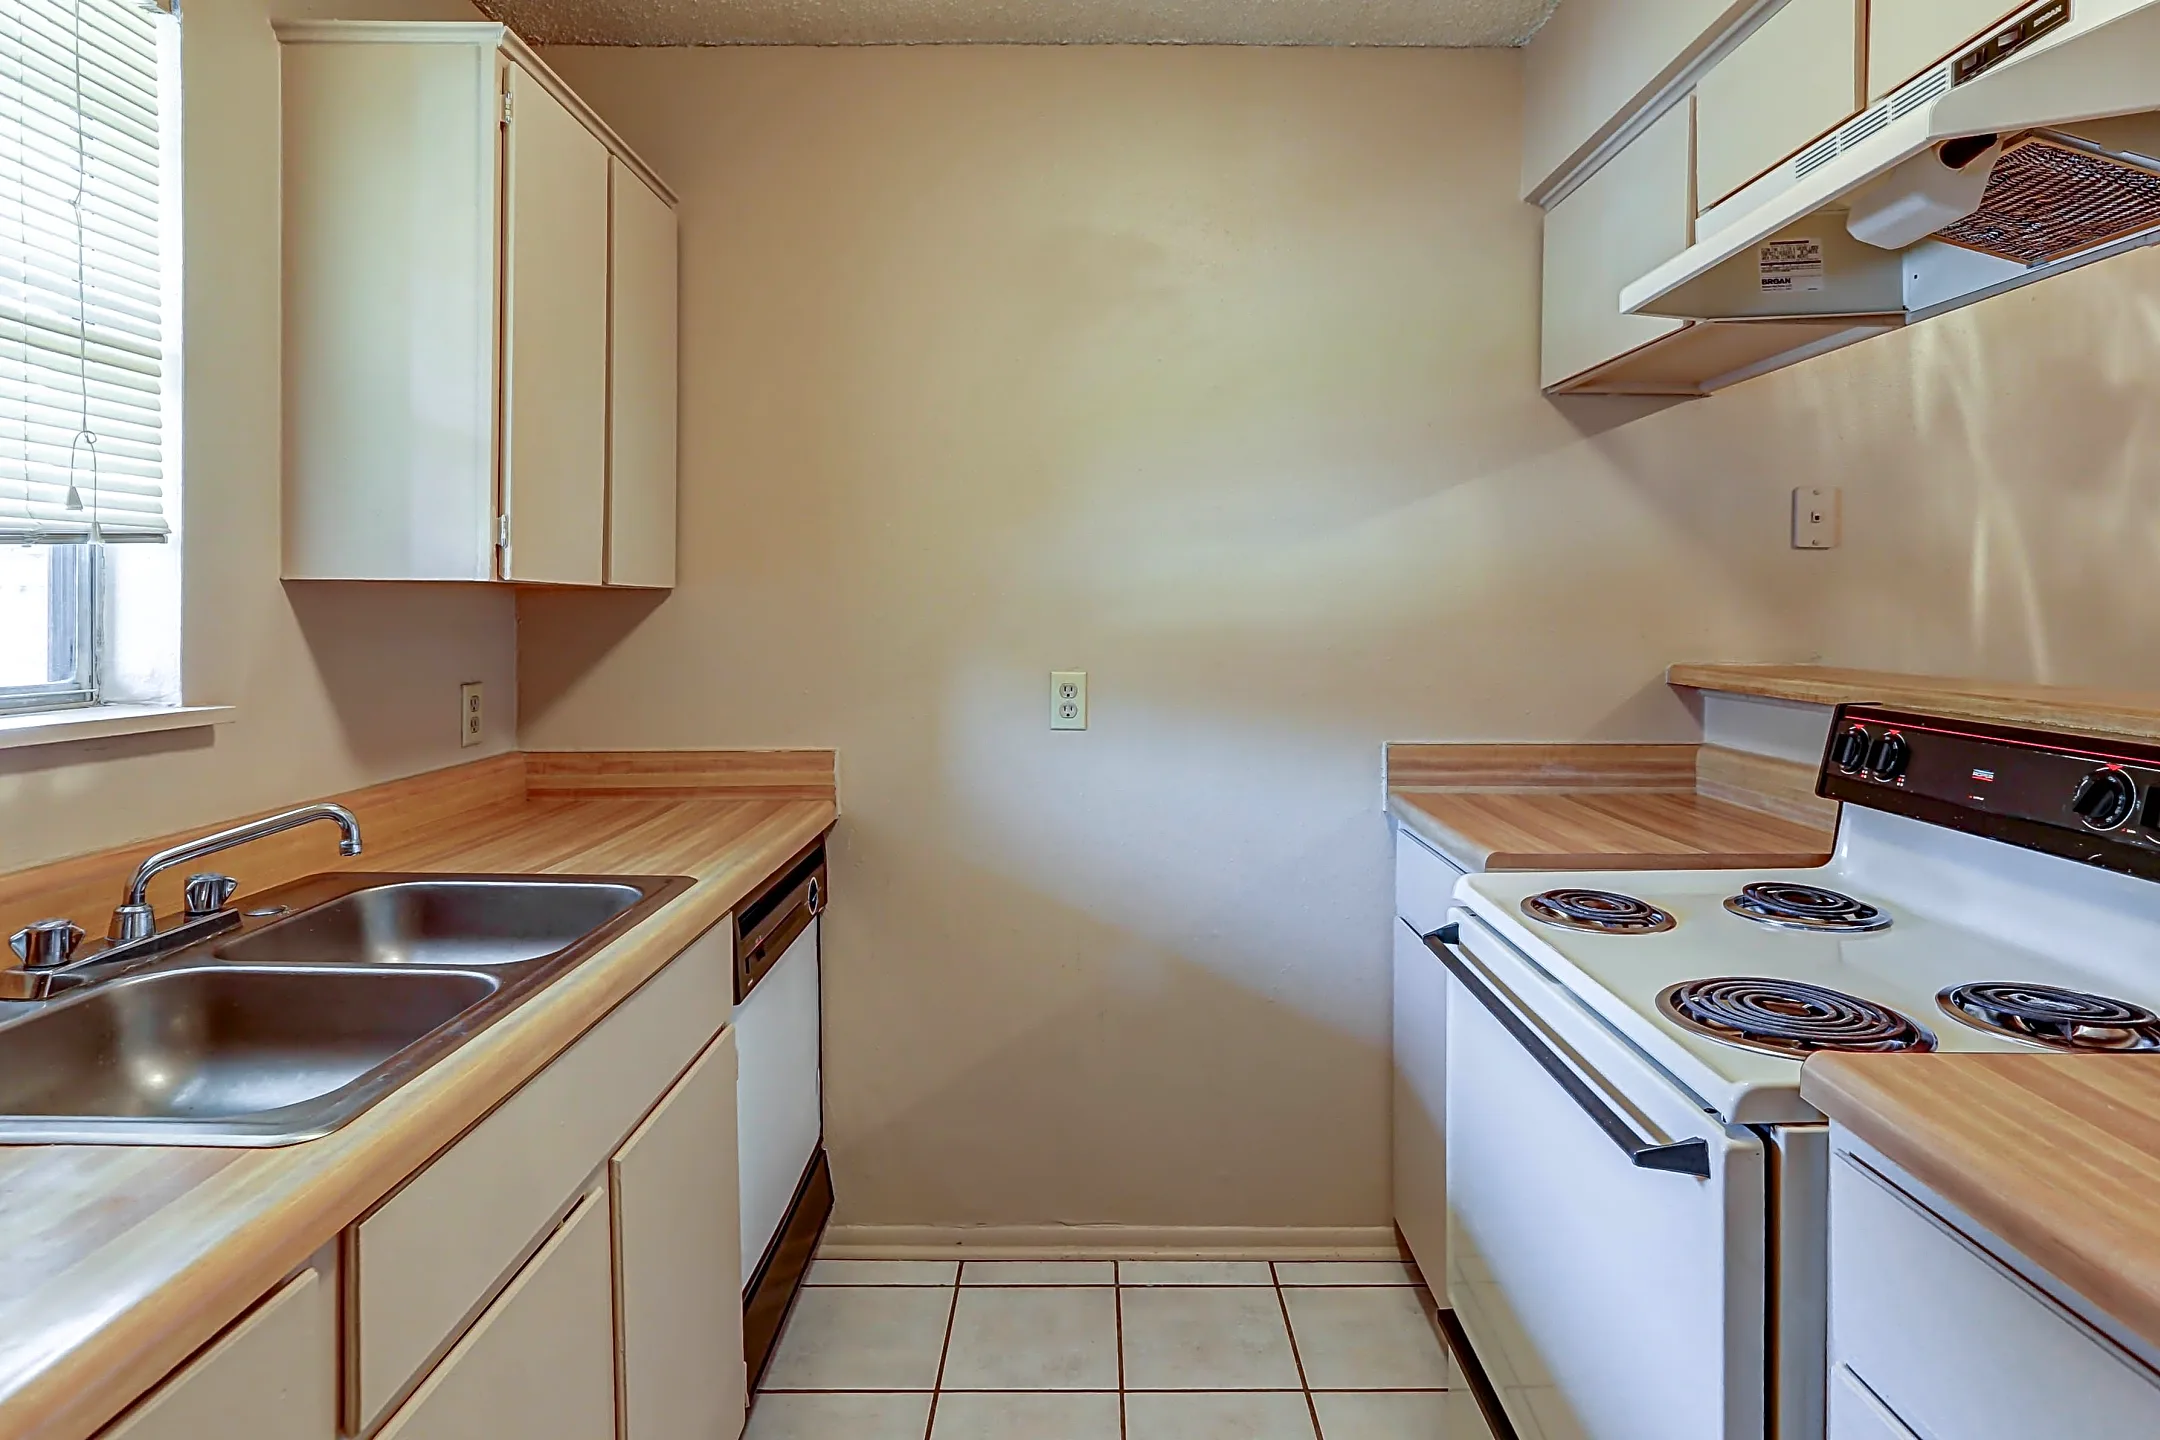 Kitchen - Southbrooke Apartments - Fort Smith, AR